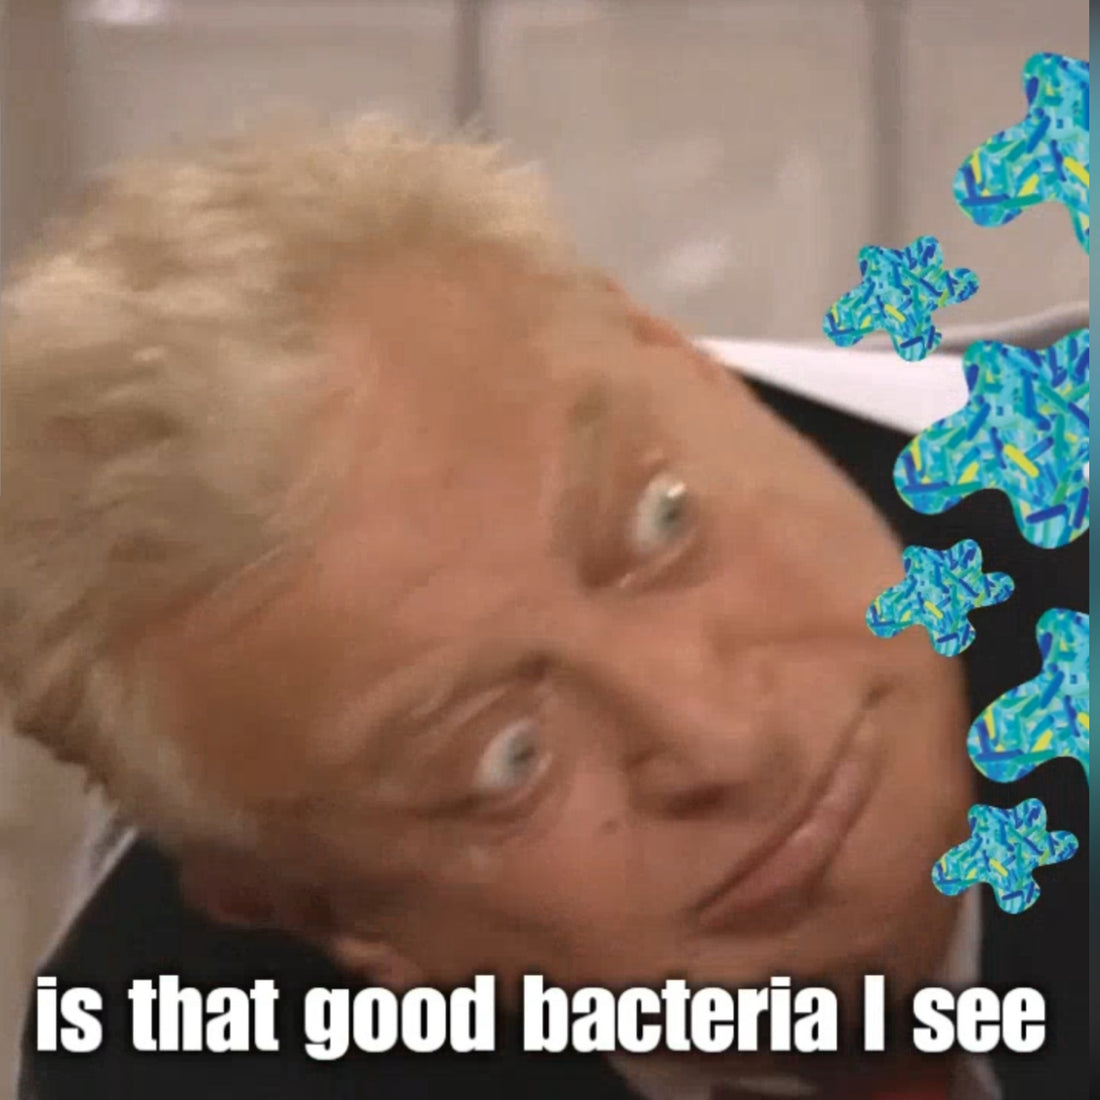 Is that good bacteria I see?